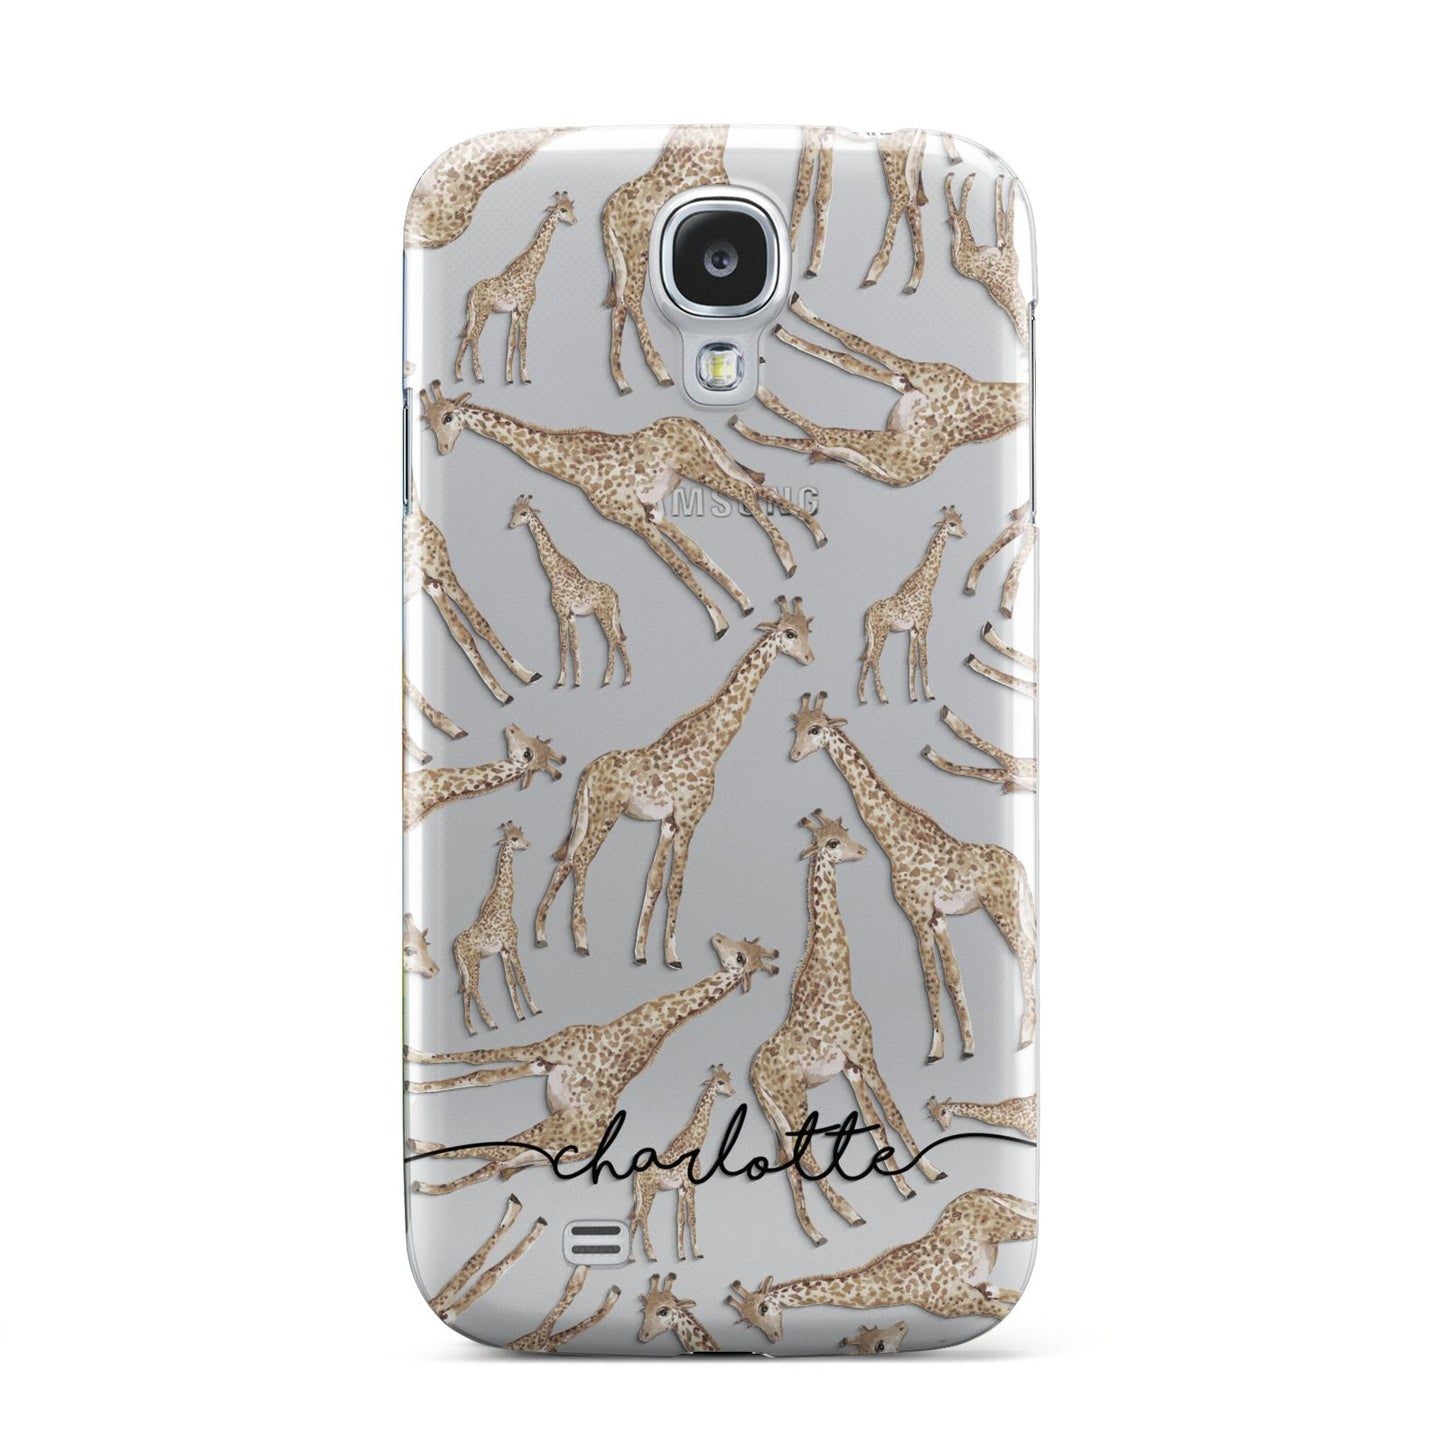 Personalised Giraffes with Name Samsung Galaxy S4 Case